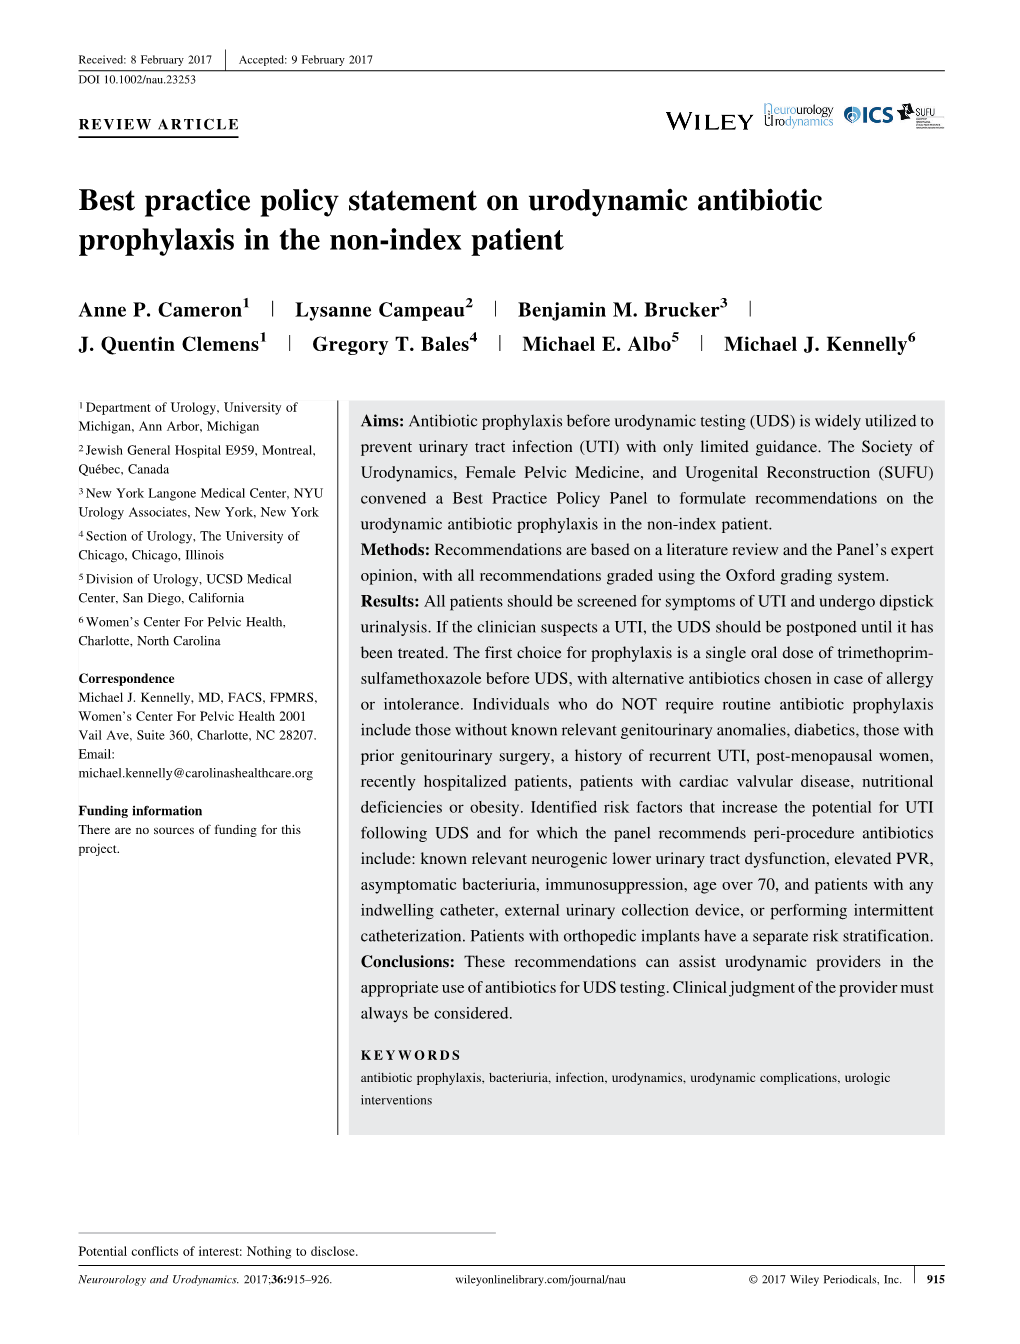 Best Practice Policy Statement on Urodynamic Antibiotic Prophylaxis in the Non-Index Patient